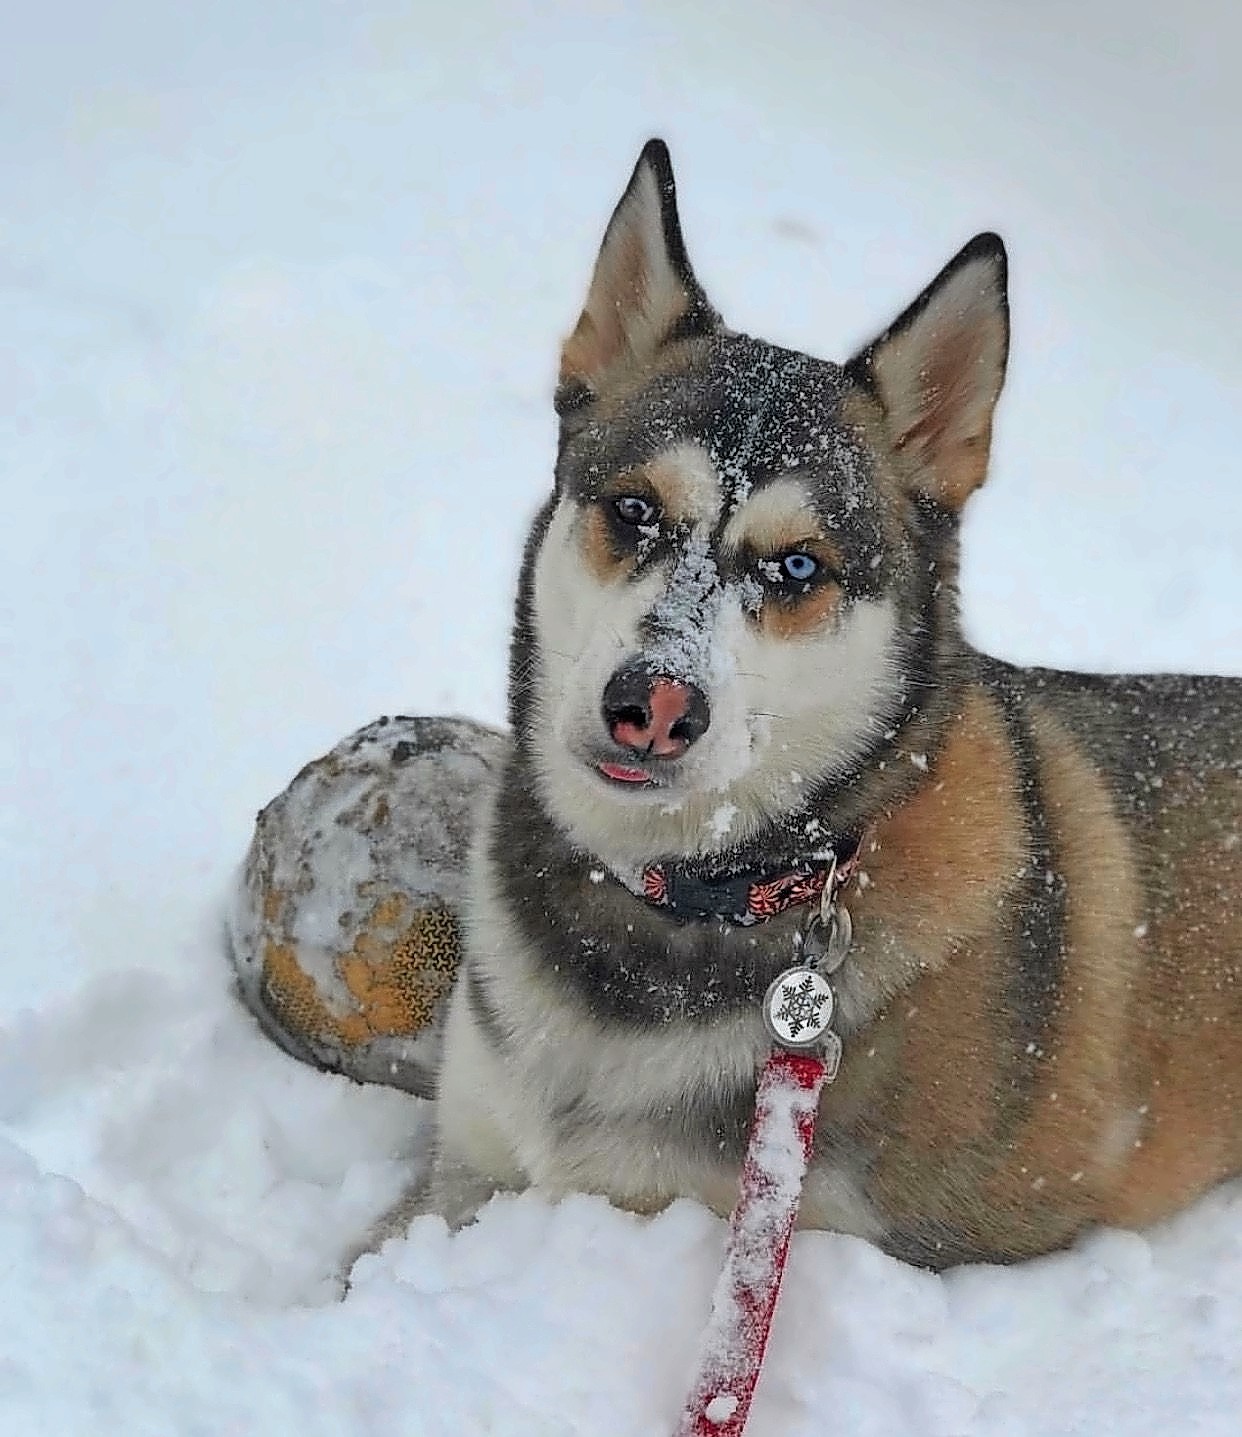 Alaska, a 1-year-old husky, was in her element last week as she bopped around in the first snowfall of the year outside of her home in Levittown.